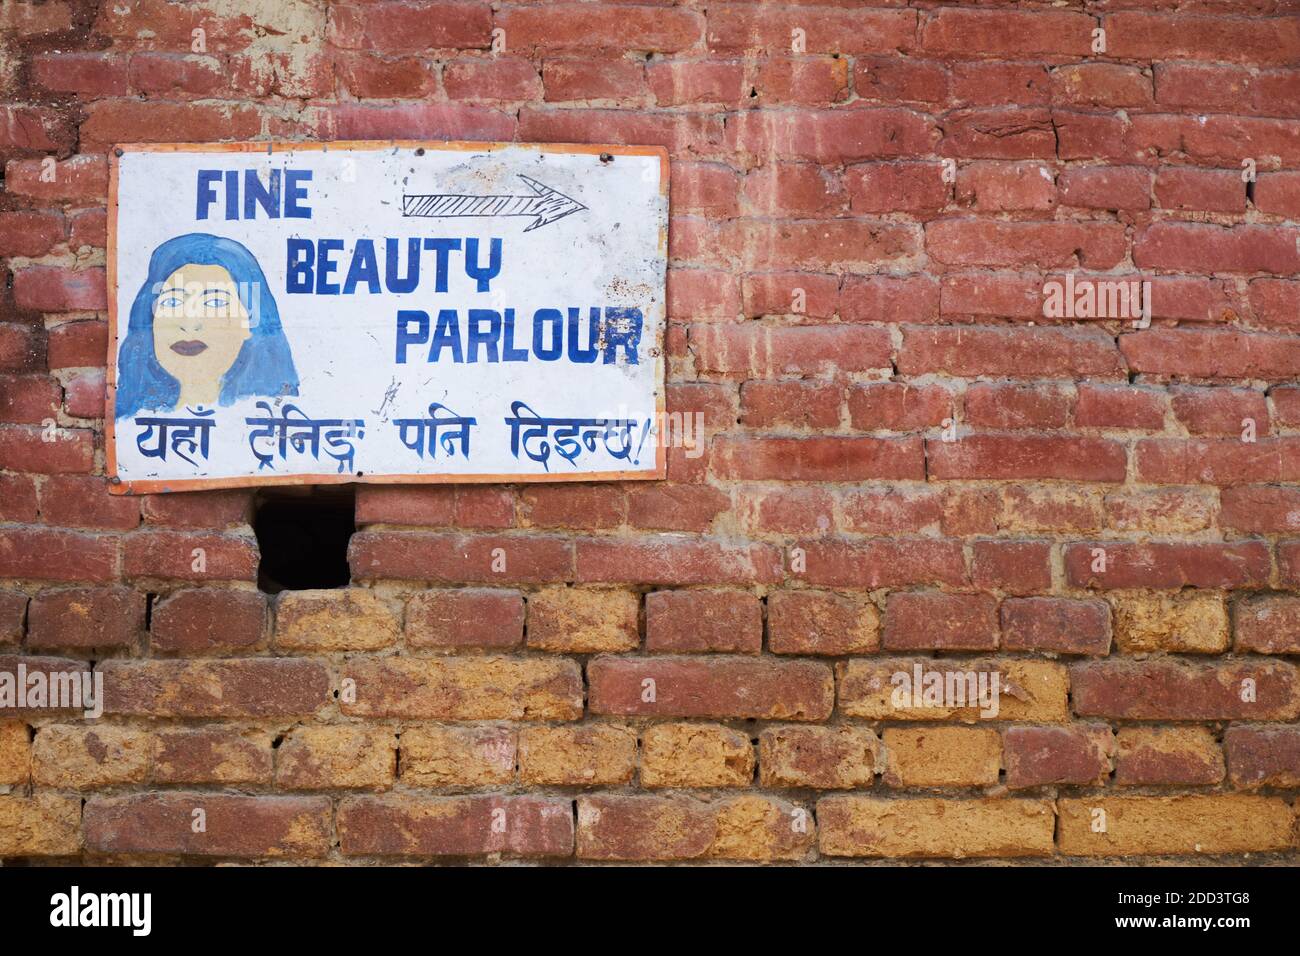 An unsophisticated, child-like drawing advertising a beauty parlor in Bhaktapur, Nepal; the sentence in Nepali says that training is also available Stock Photo